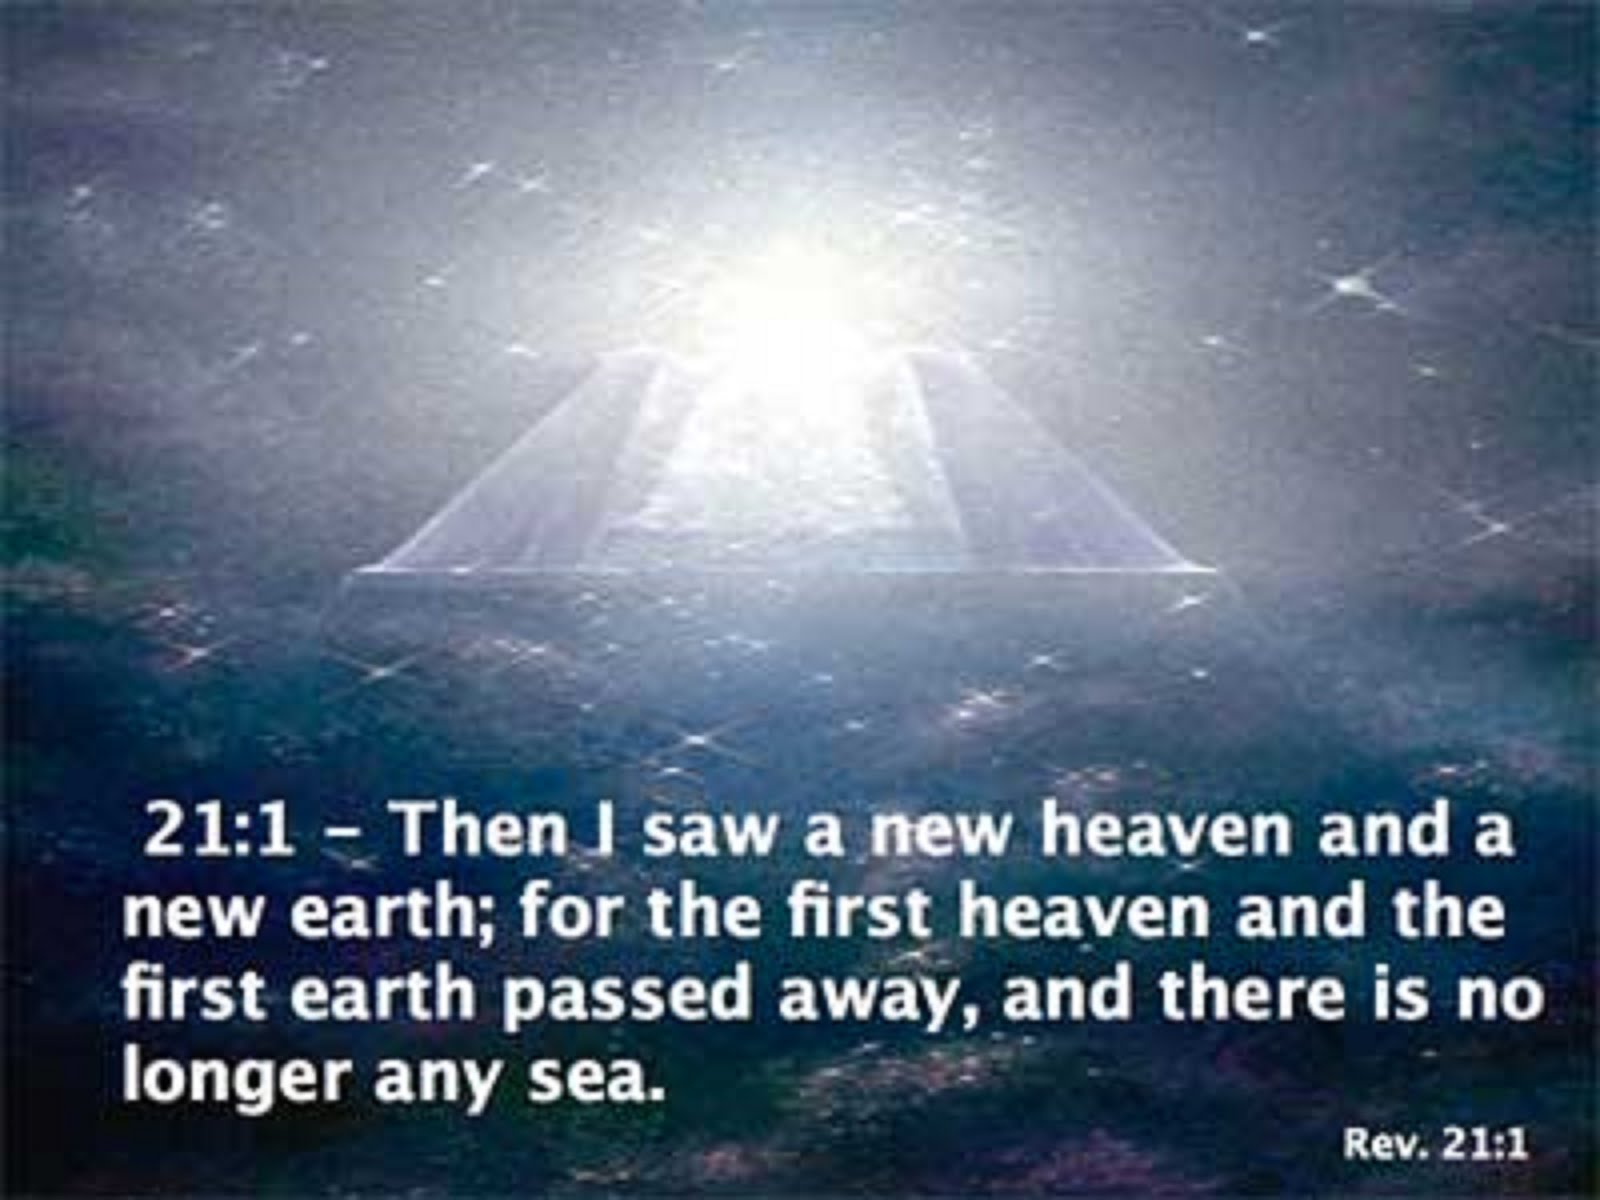 BUT WE HOPE FOR A NEW HEAVEN AND A NEW EARTH